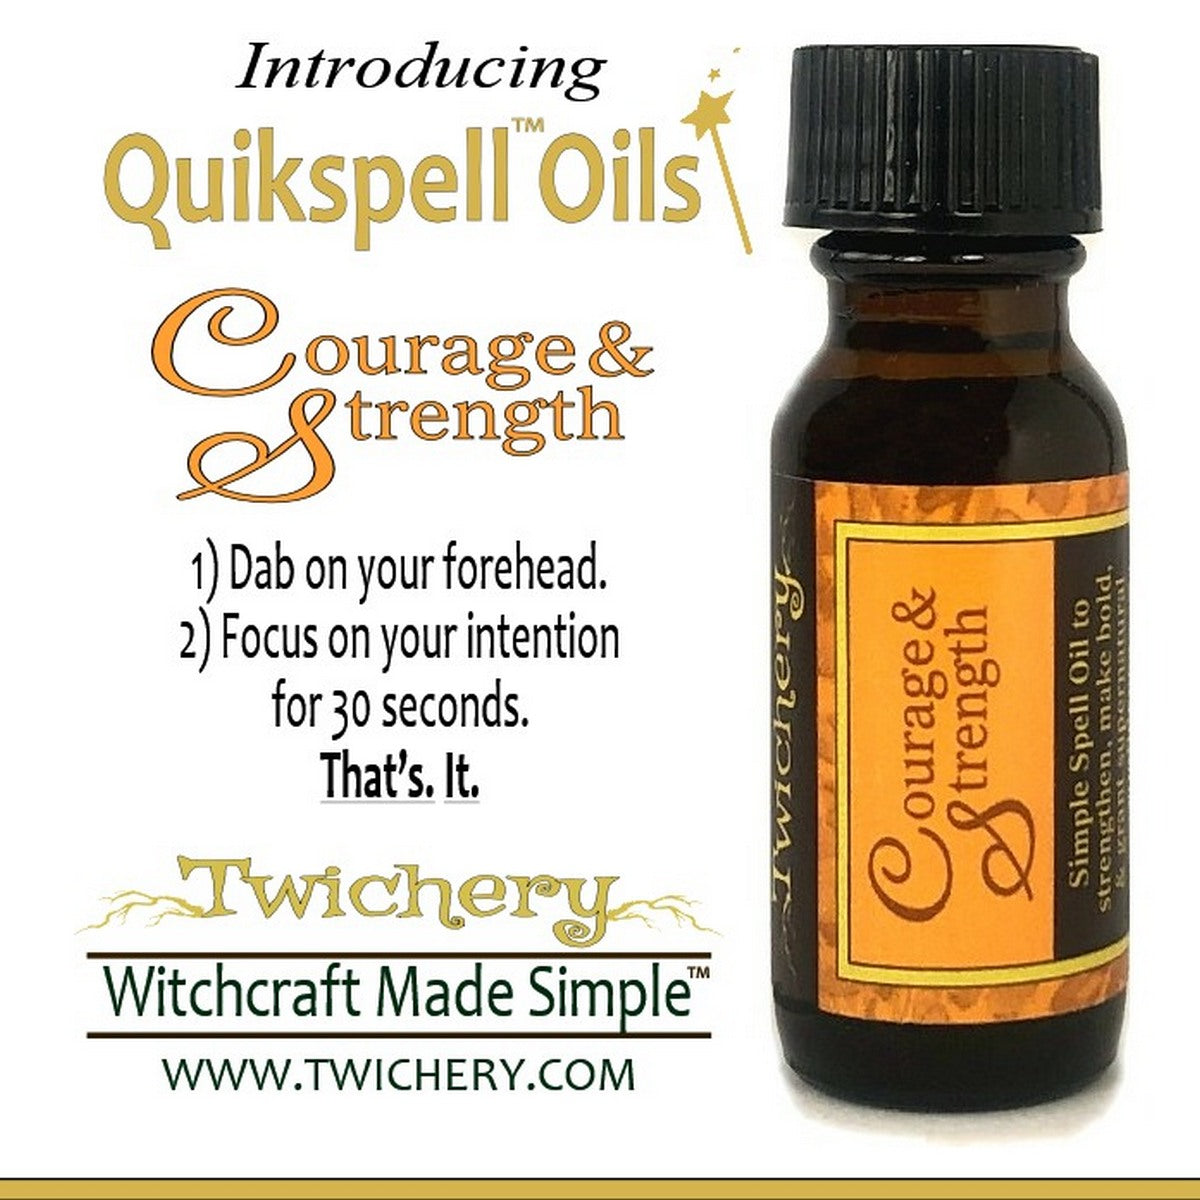 Twichery Courage & Strength Quikspell Oil is for strengthening you when you need it most. Quickly! Hoodoo, voodoo, wicca, pagan, mojo, Witchcraft Made Simple!